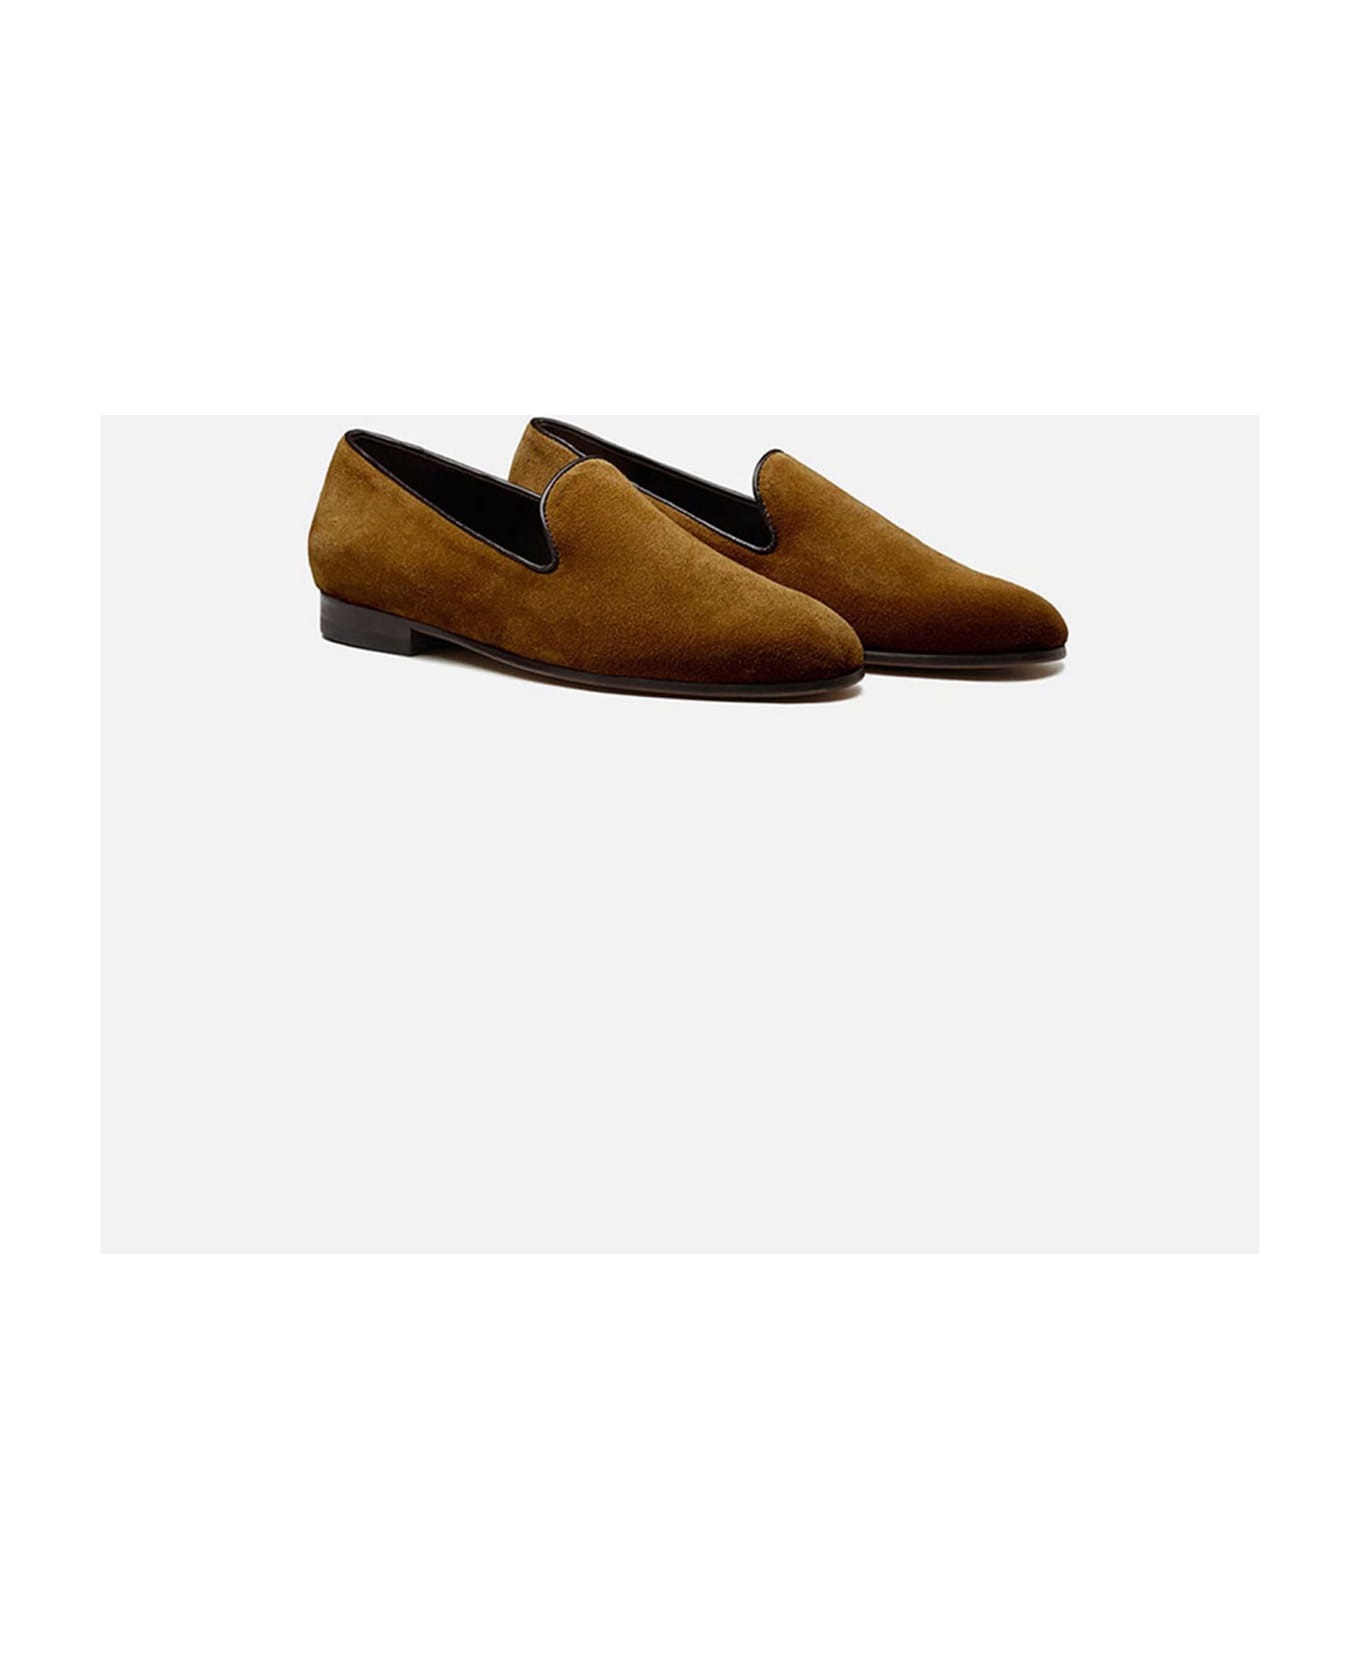 CB Made in Italy Suede Slip-on Positano - Tobacco ローファー＆デッキシューズ